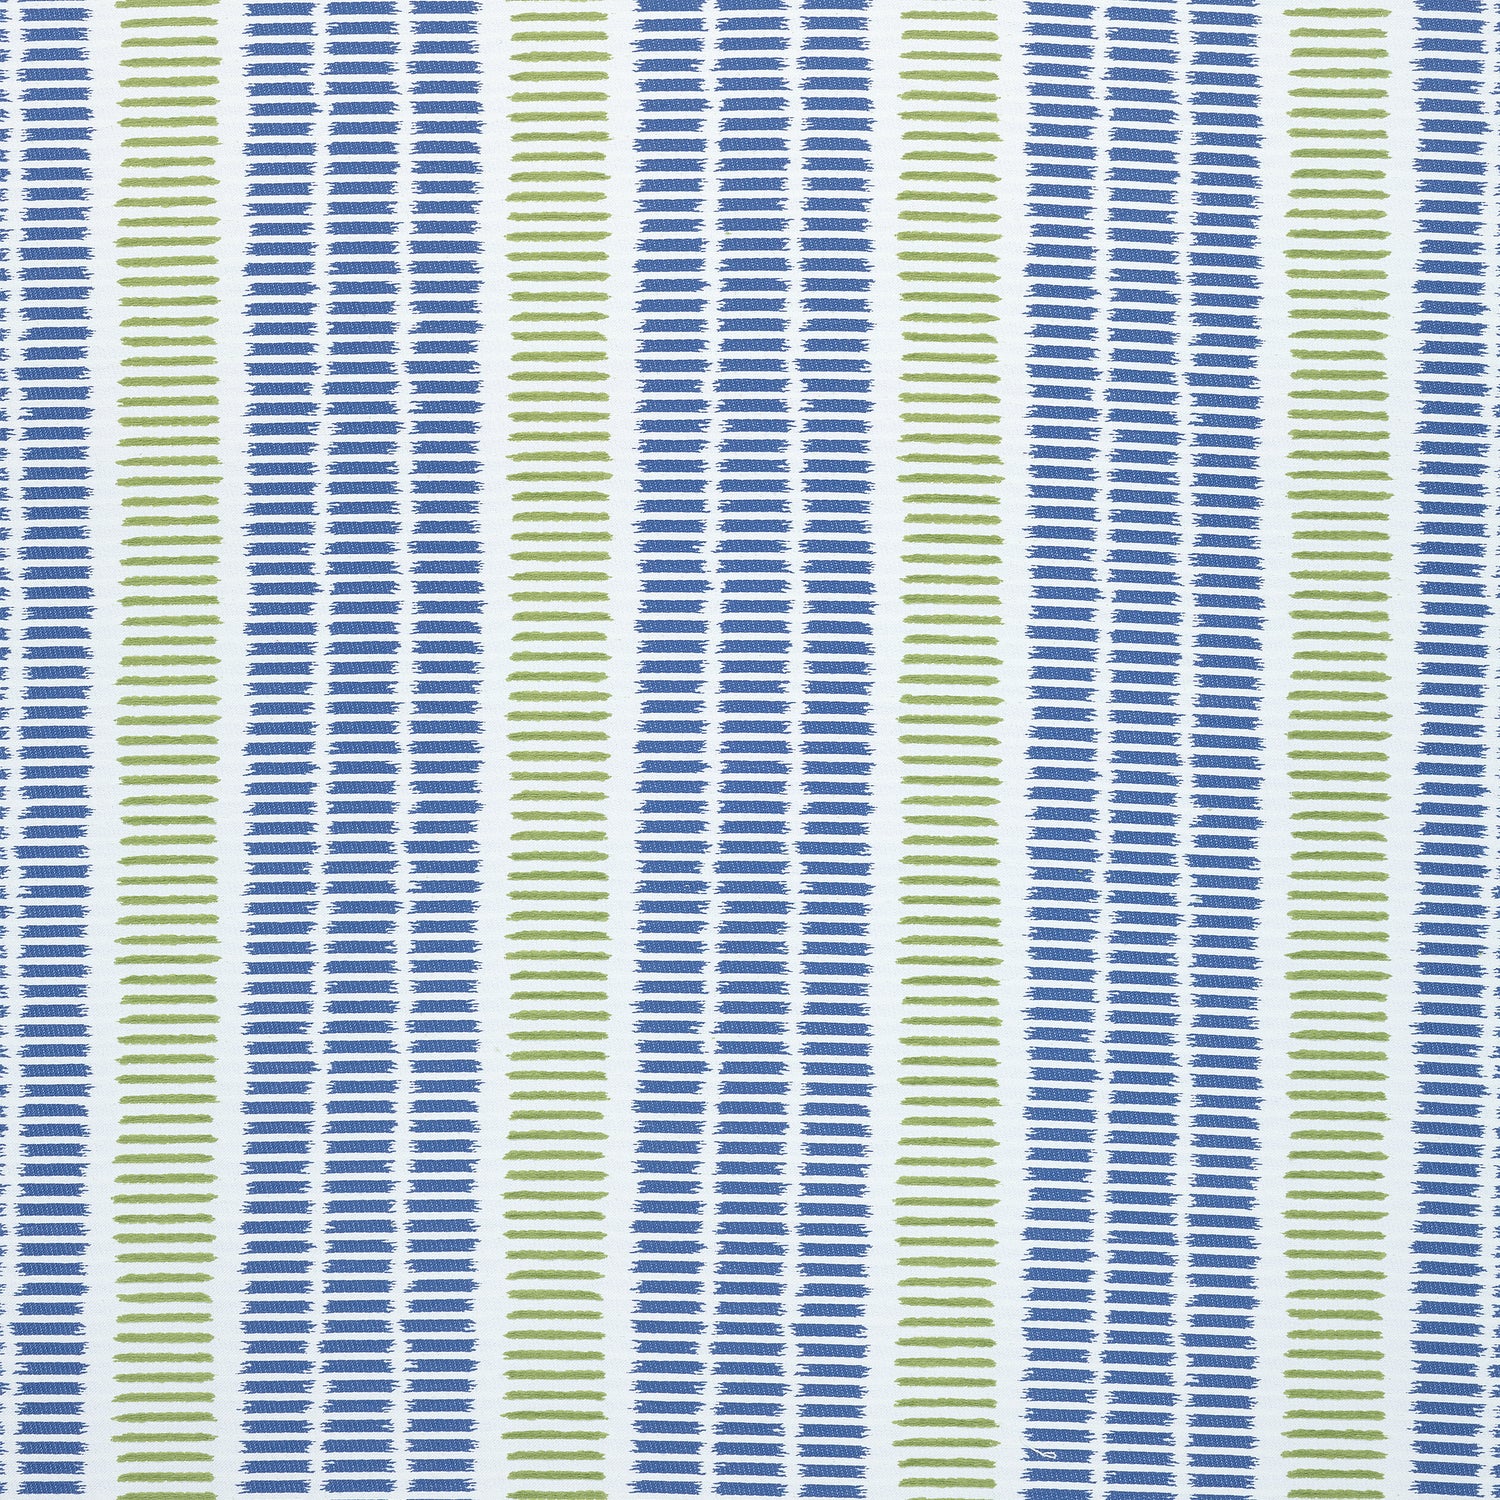 Topsail Stripe fabric in royal and green apple color - pattern number W73516 - by Thibaut in the Landmark collection